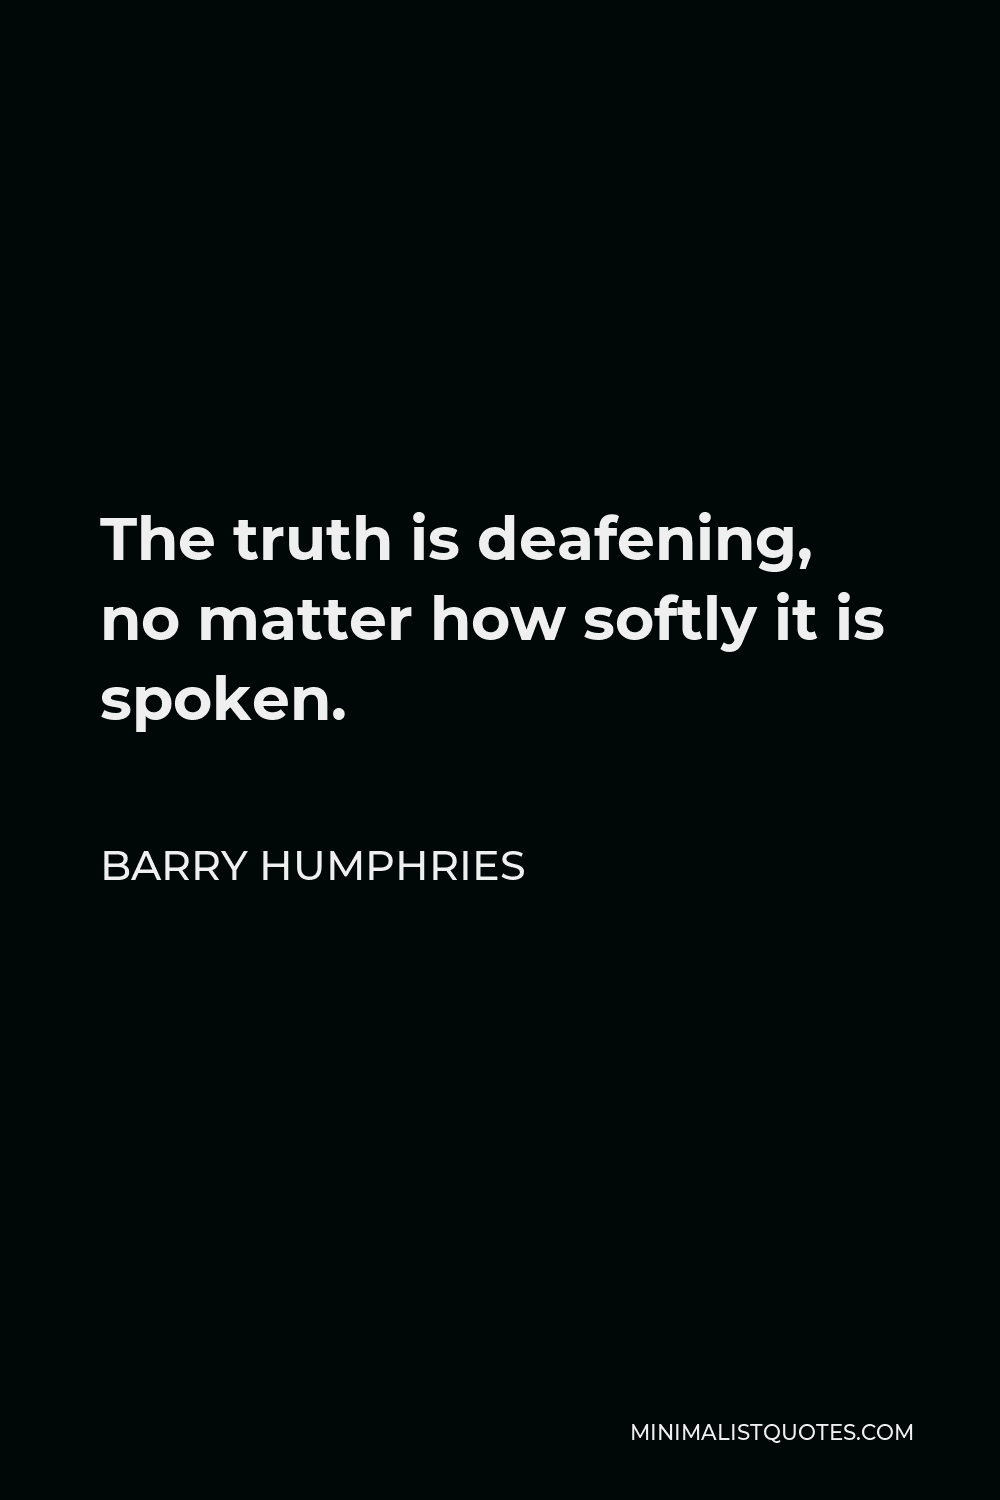 Barry Humphries Quote - The truth is deafening, no matter how softly it is spoken.